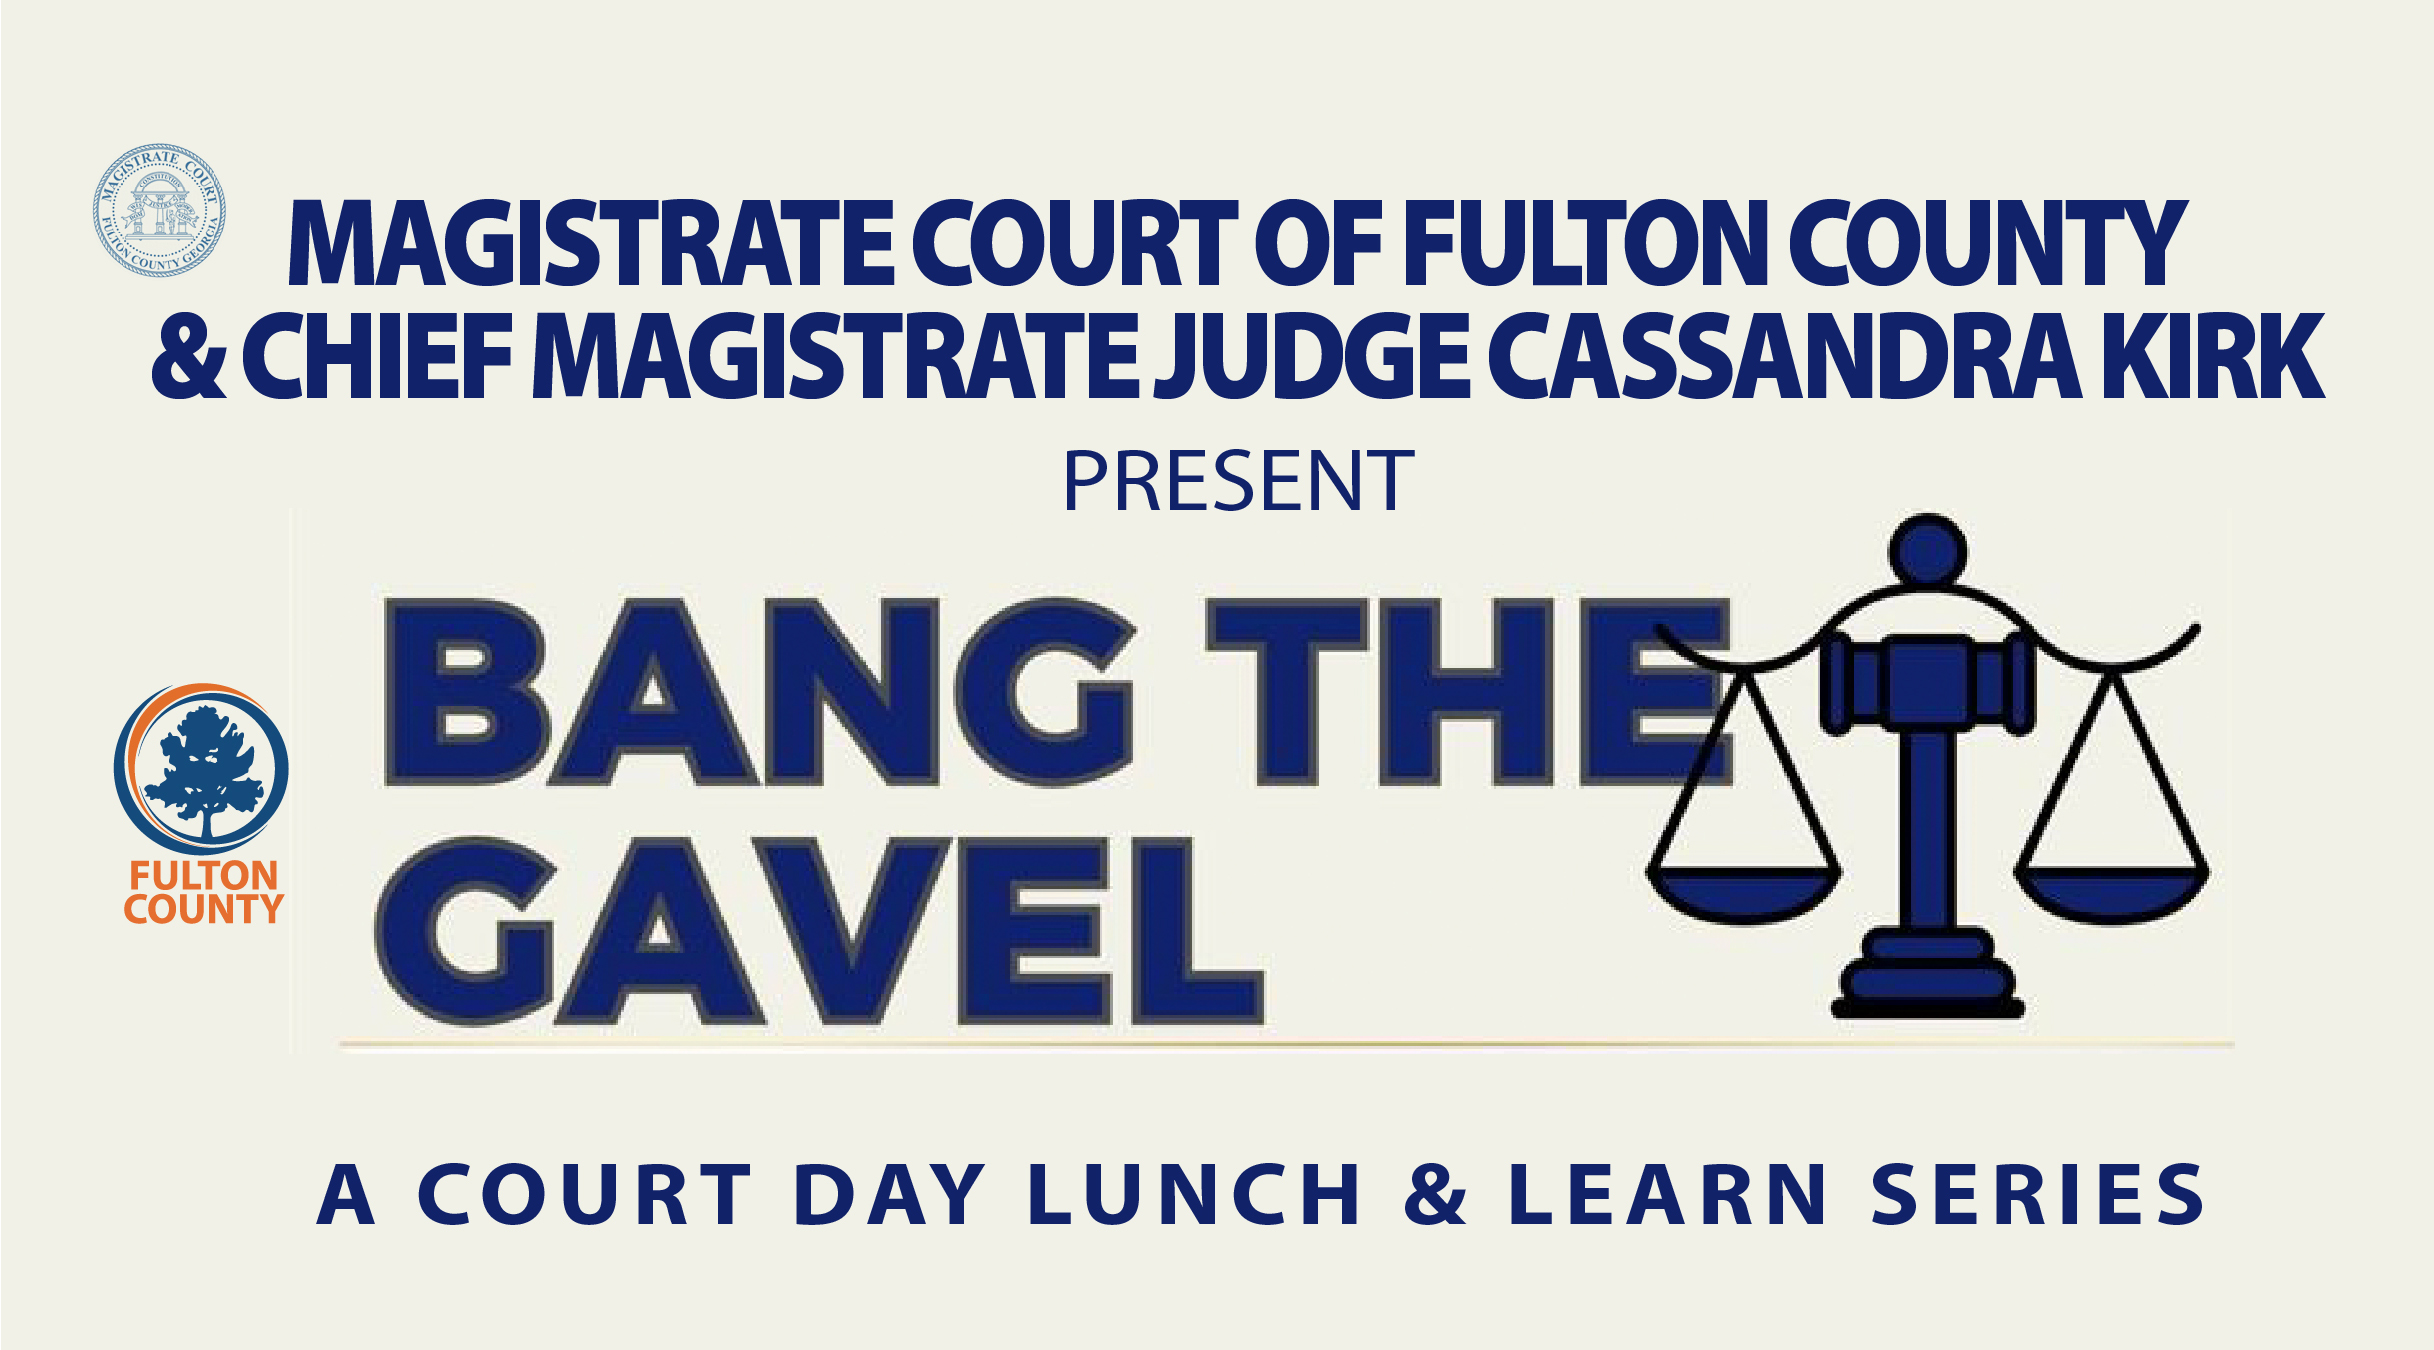 Bang the gavel a court day lunch and learn